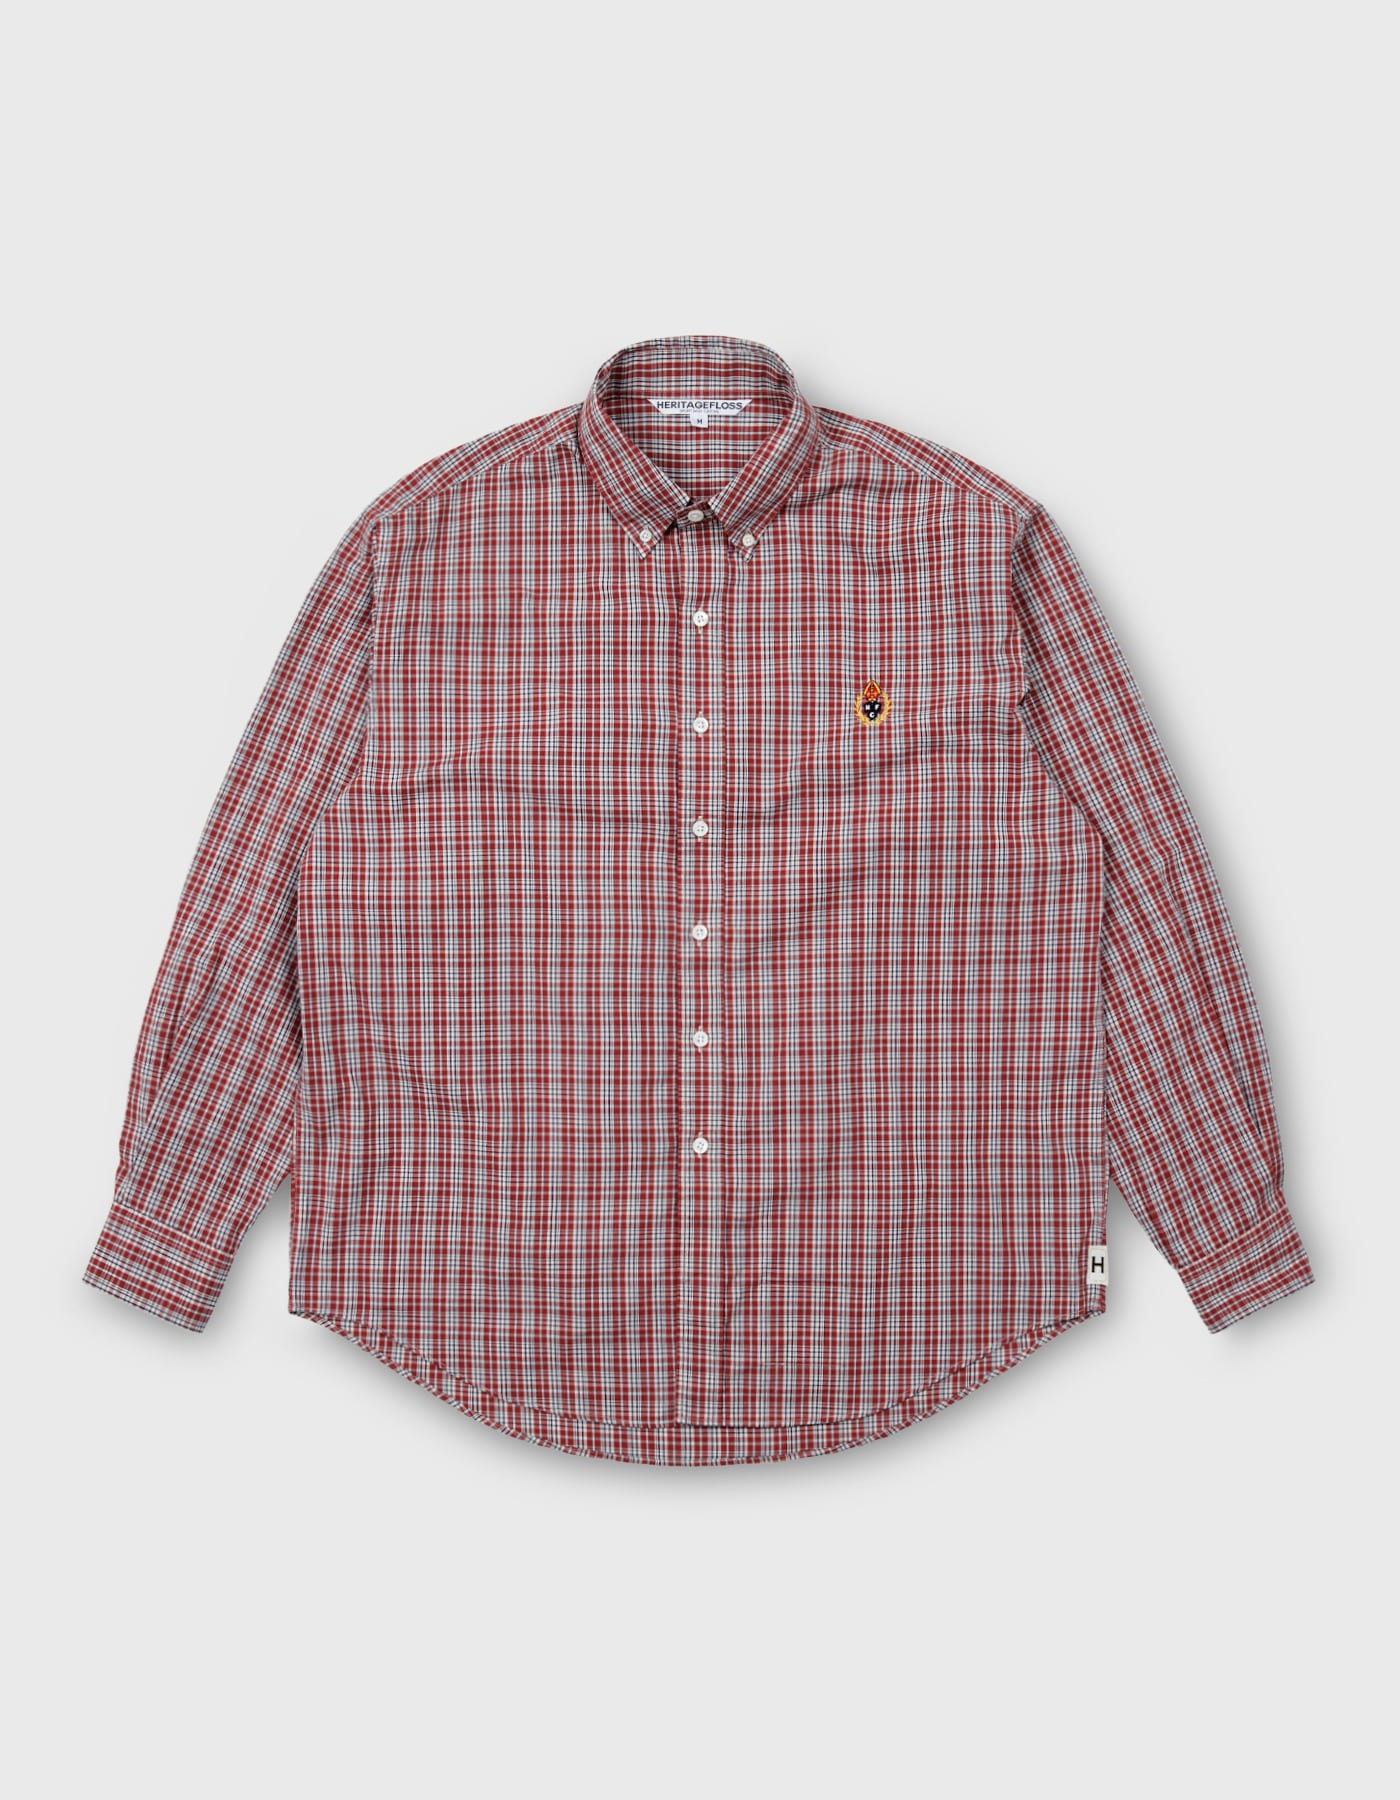 HFC CREST CHECKED SHIRT / Red-Black